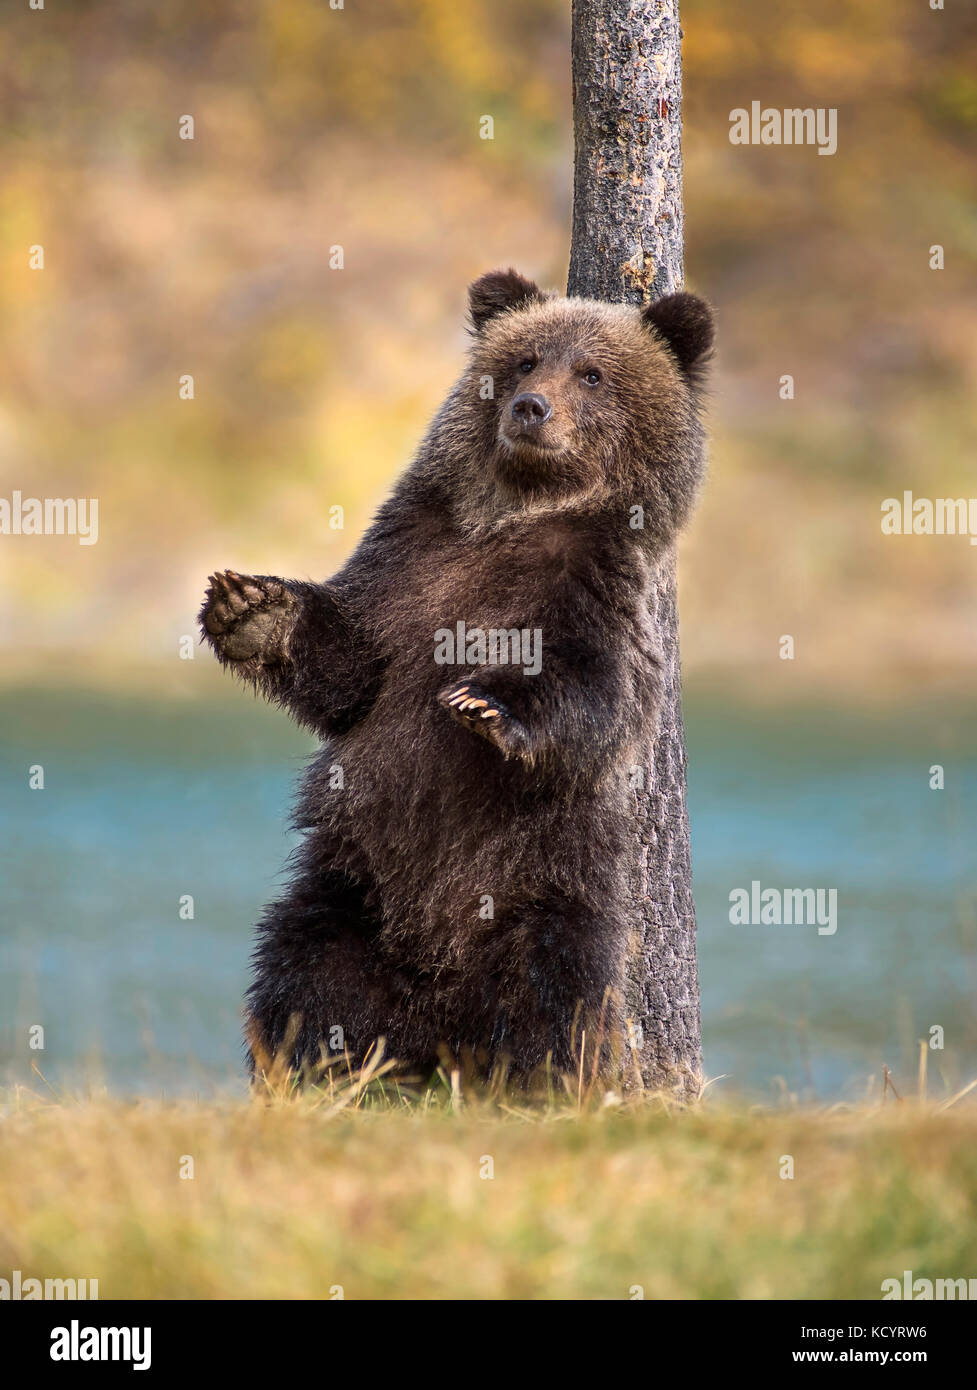 Grizzly Bear (Ursus arctos horribilis), COY (Cub-Of-the-Year), first year cub, standing and scratching its back, Fall, Autumn, Central British Columbia, Canada Stock Photo